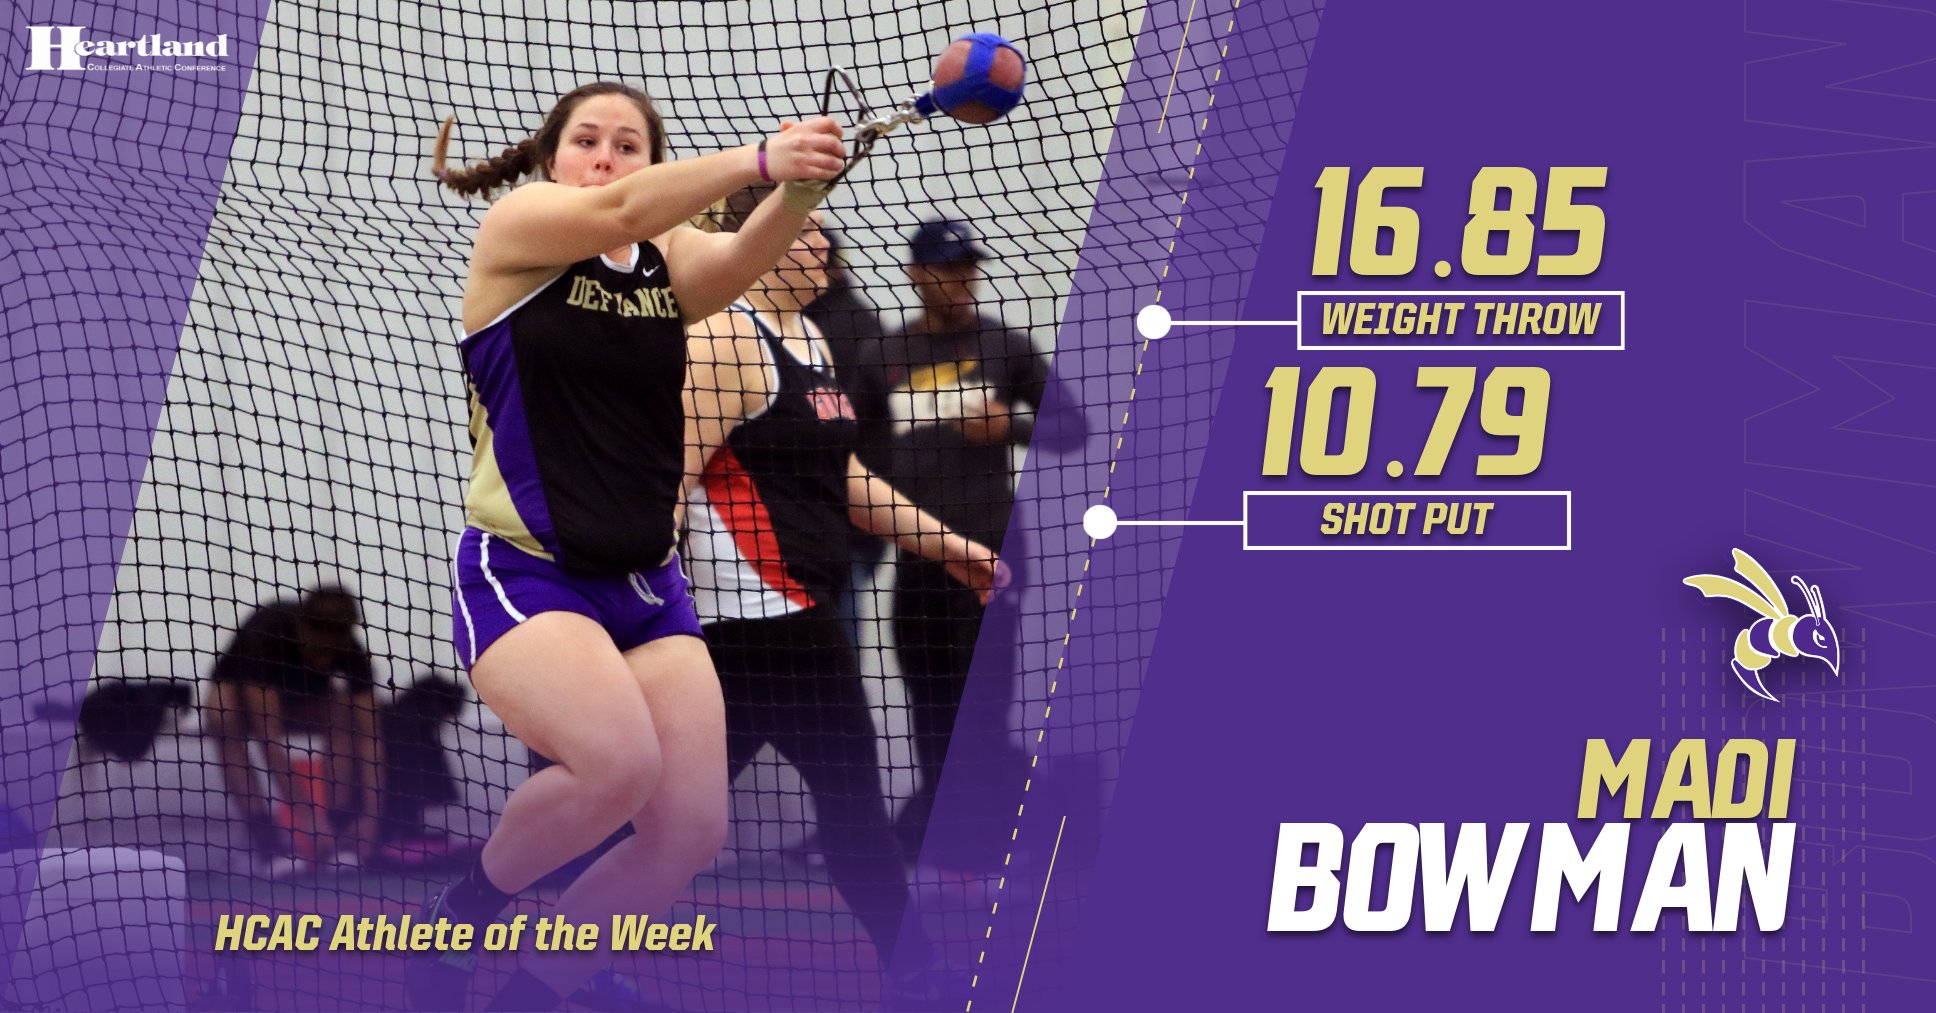 Bowman's record-breaking performance launches her to HCAC Athlete of the Week